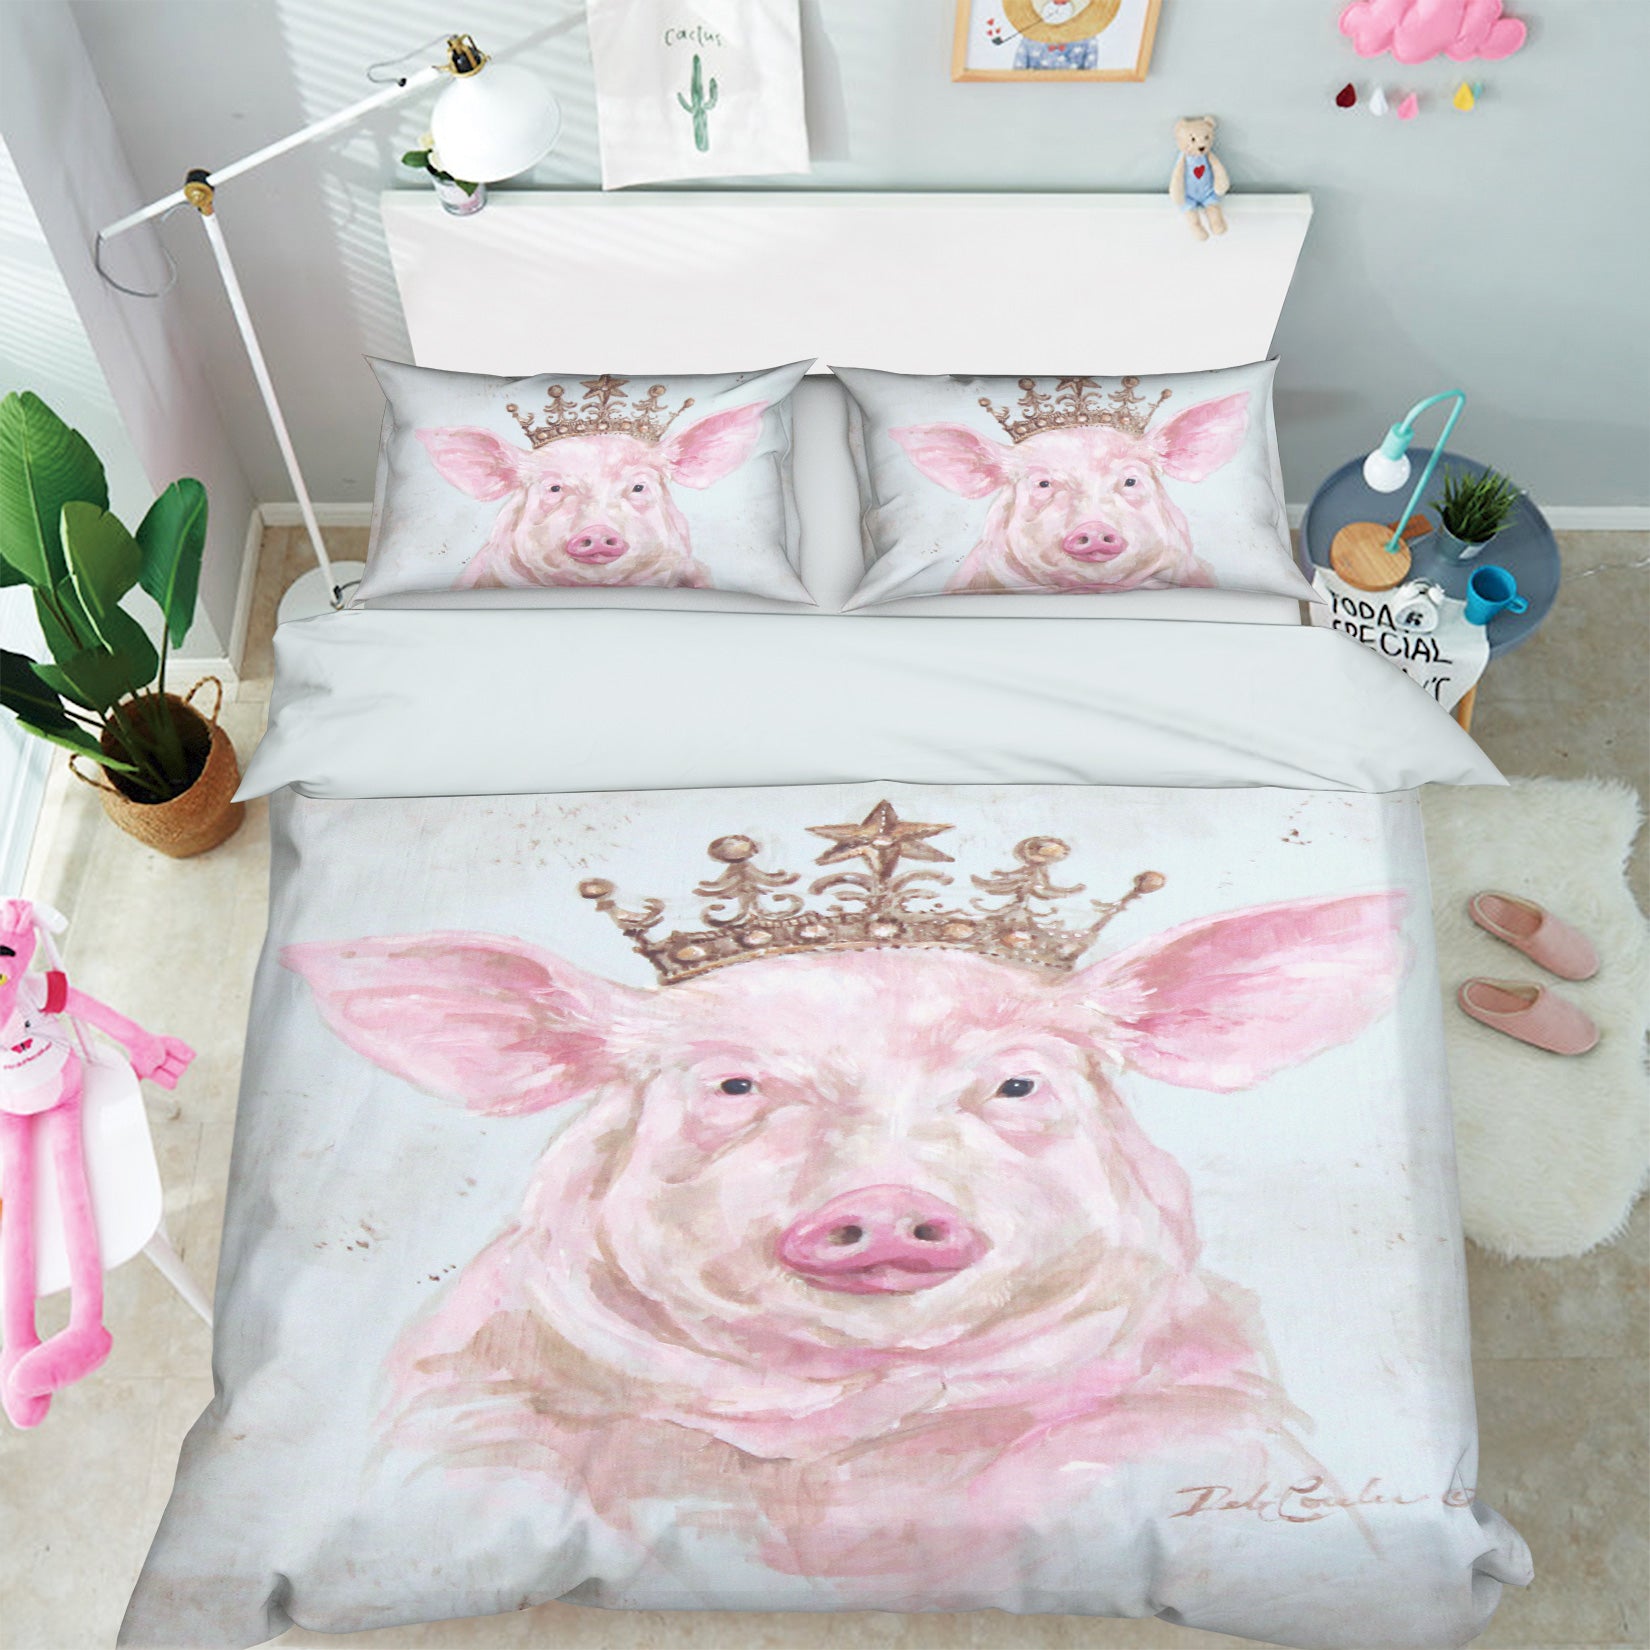 3D Crown Pig 2083 Debi Coules Bedding Bed Pillowcases Quilt